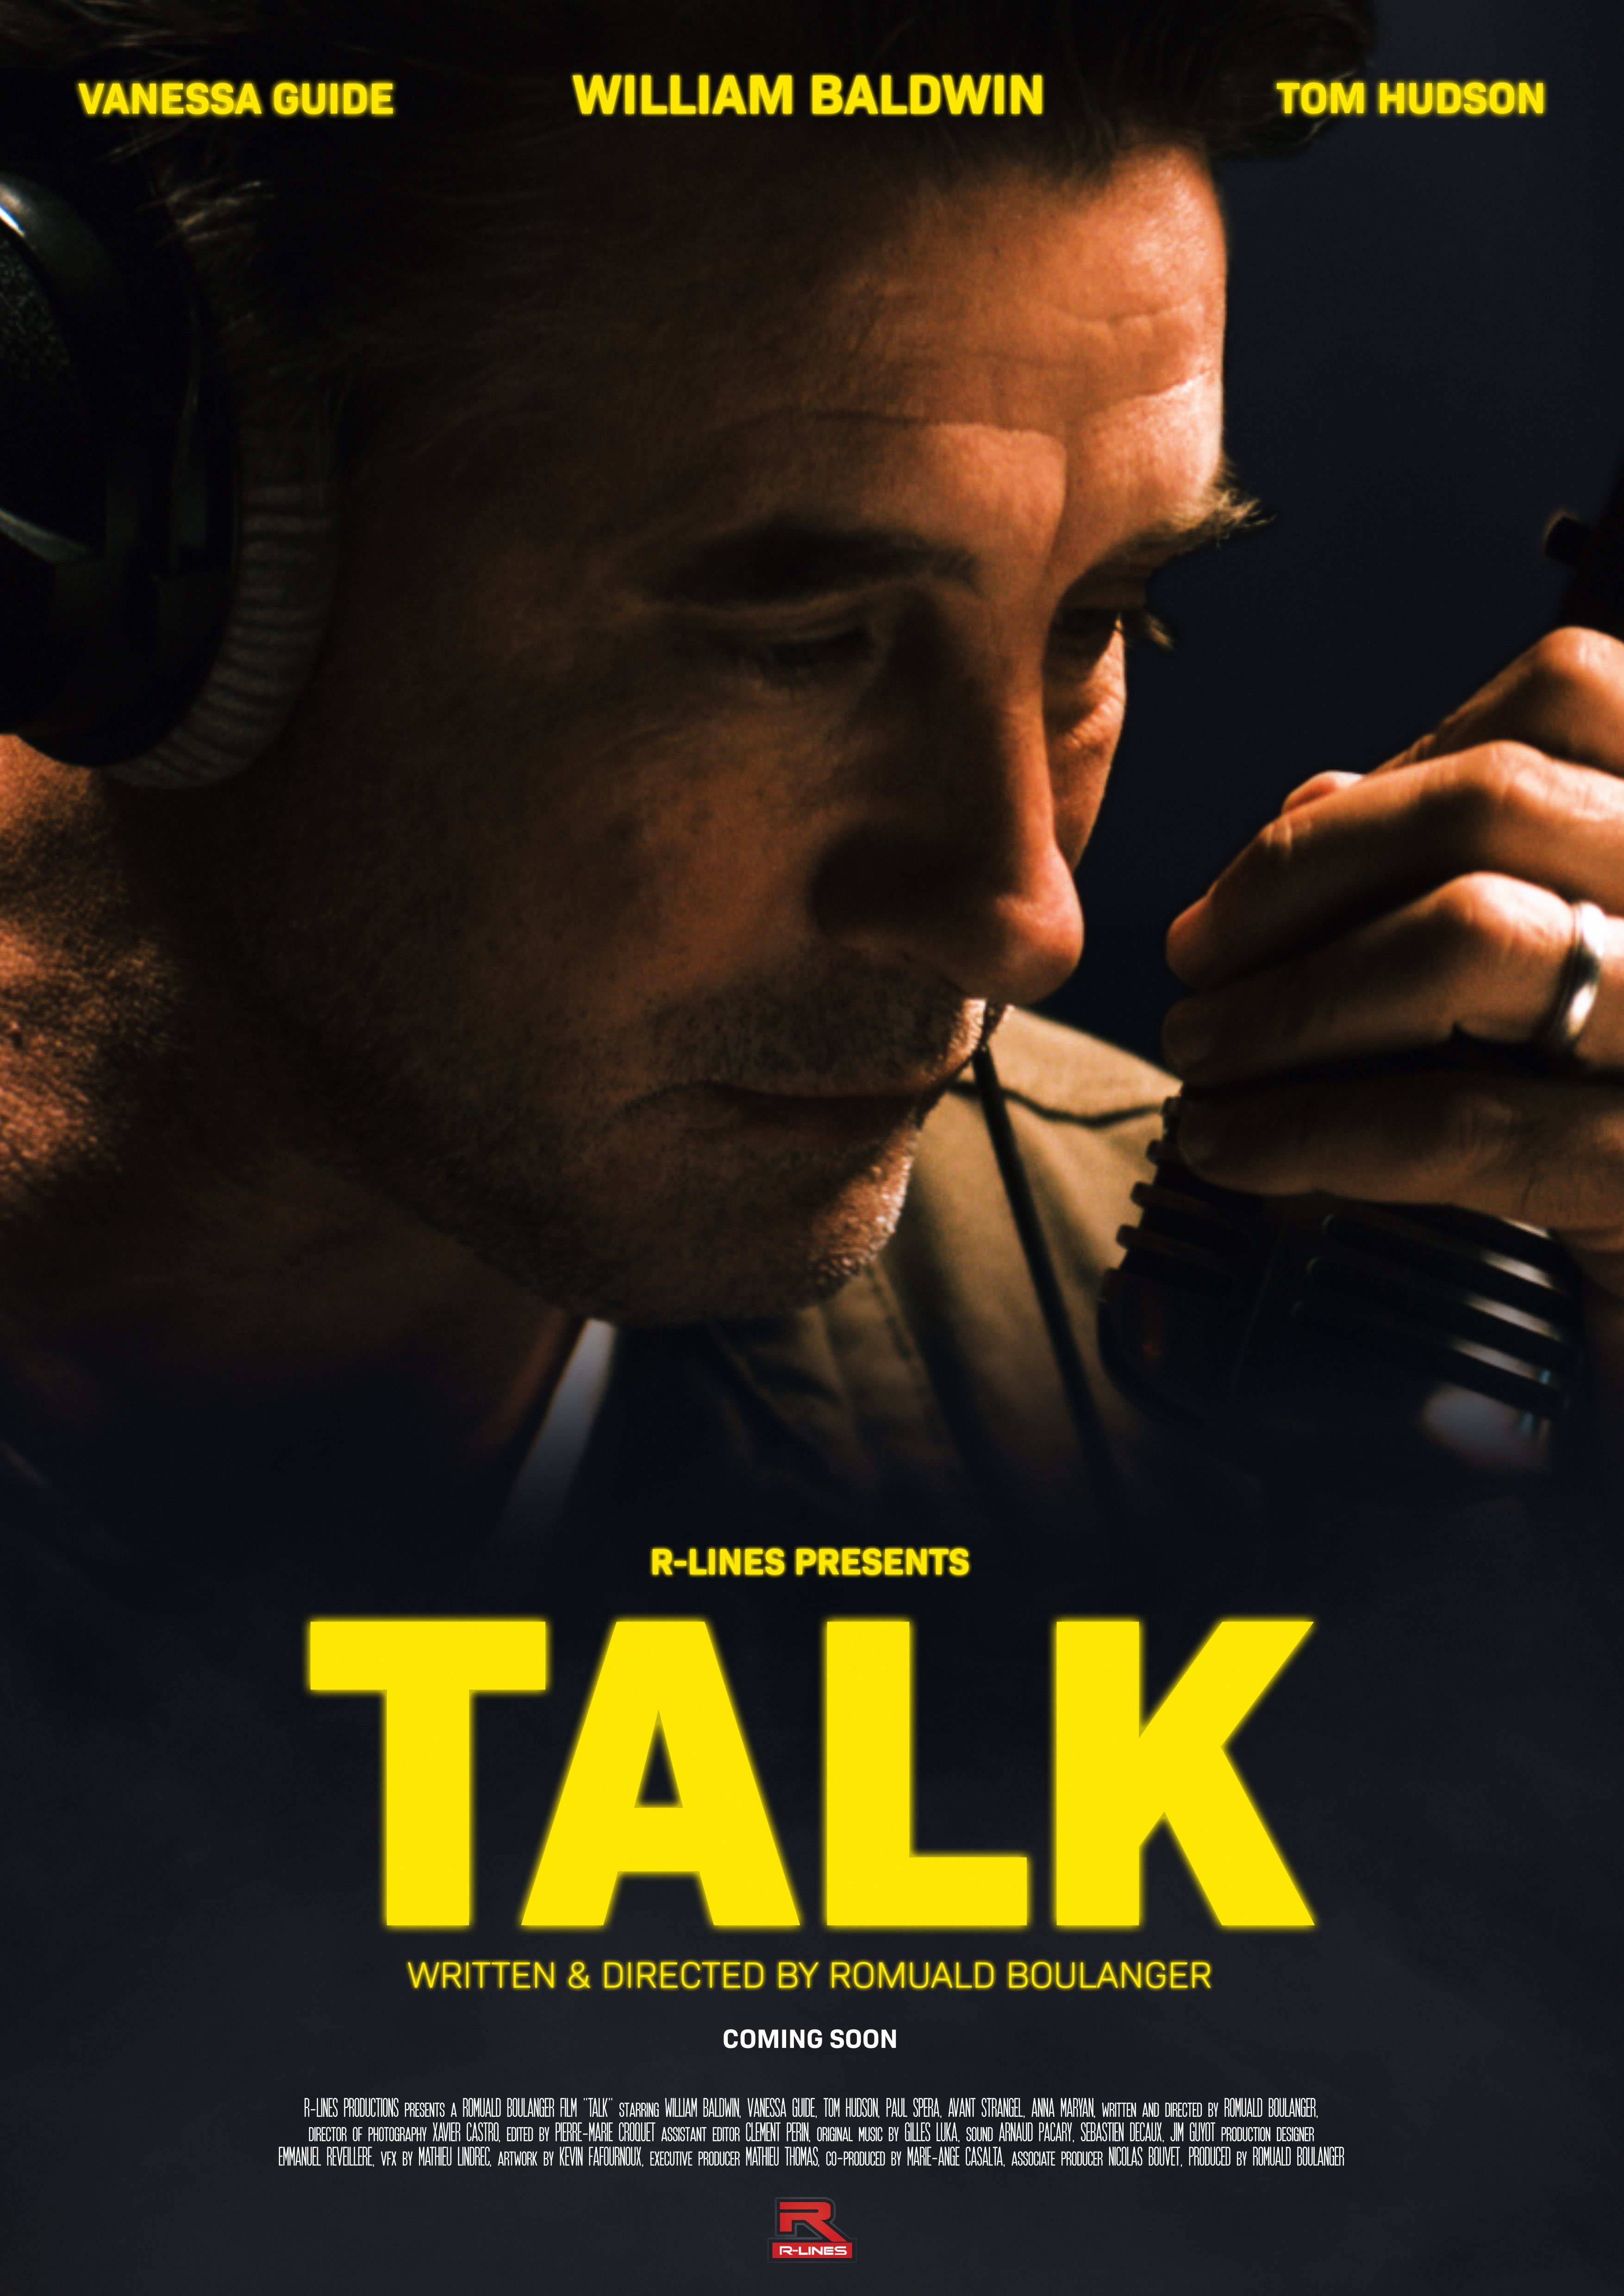 Best Actor honors go to William Baldwin for his role in the festival circuit hit, “Talk,” a thriller from Romuald Boulanger about a late night radio host.